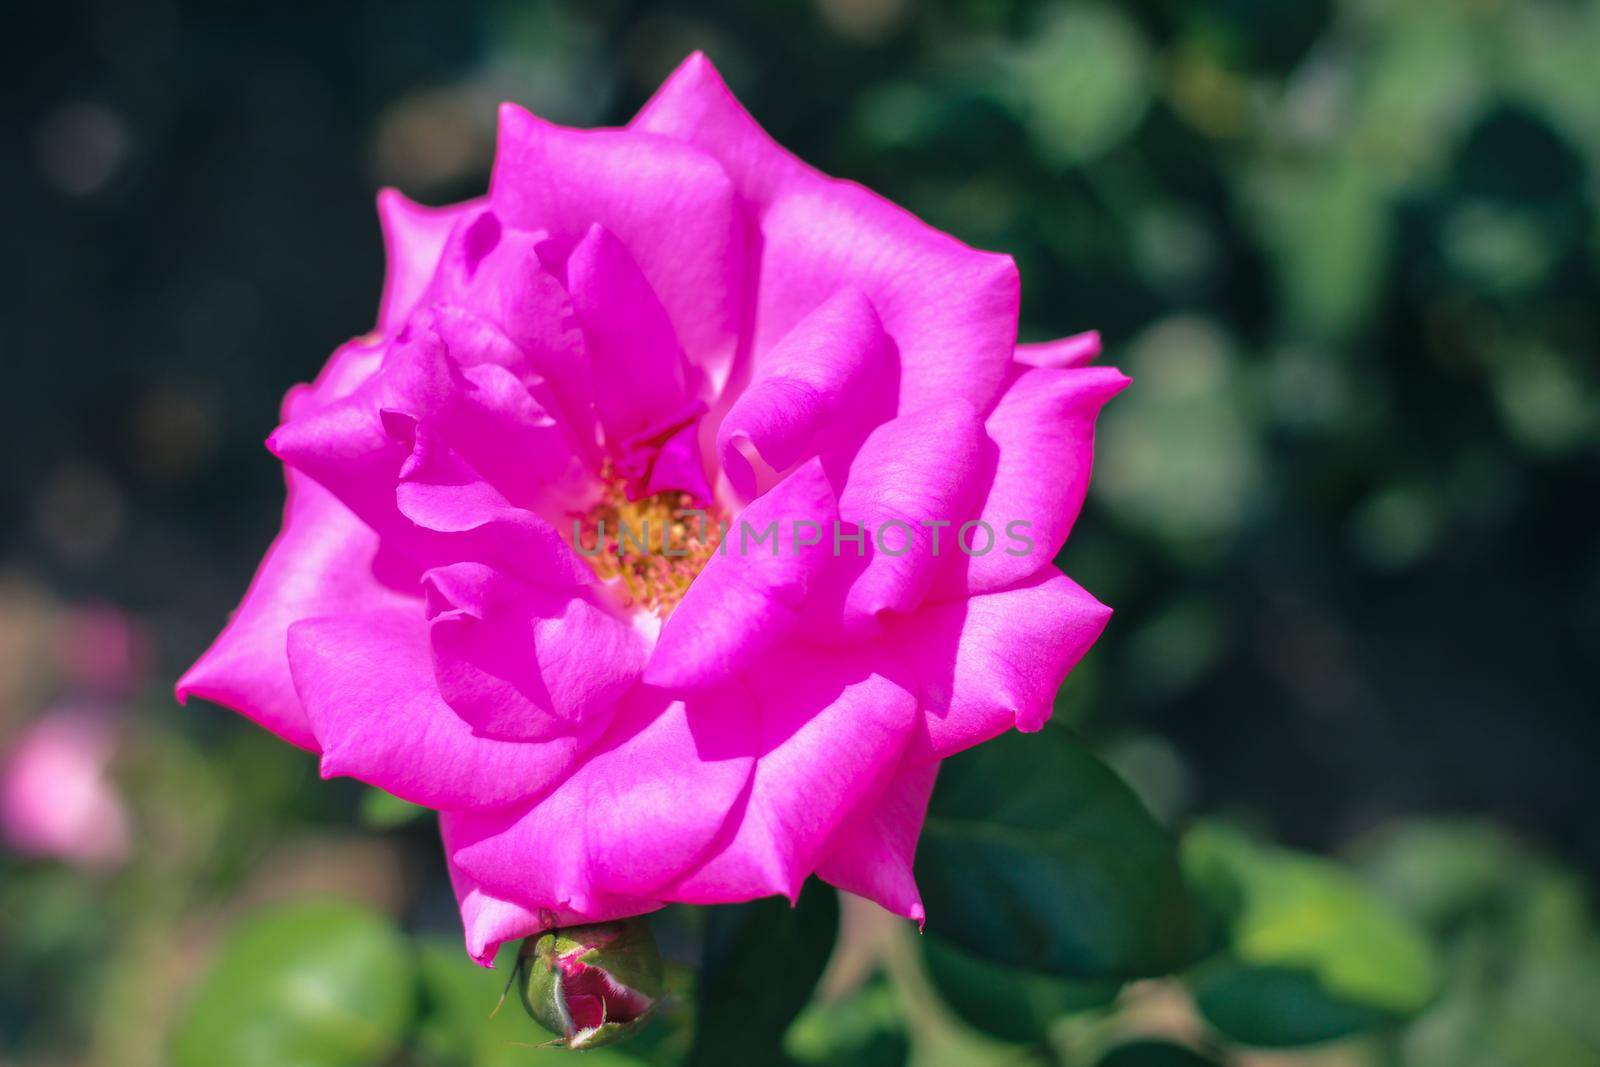 Beautiful Selection Rose Close-up in Summer Sunny Garden. Romantic Floral Bakcground or Greeting Card. by iliris